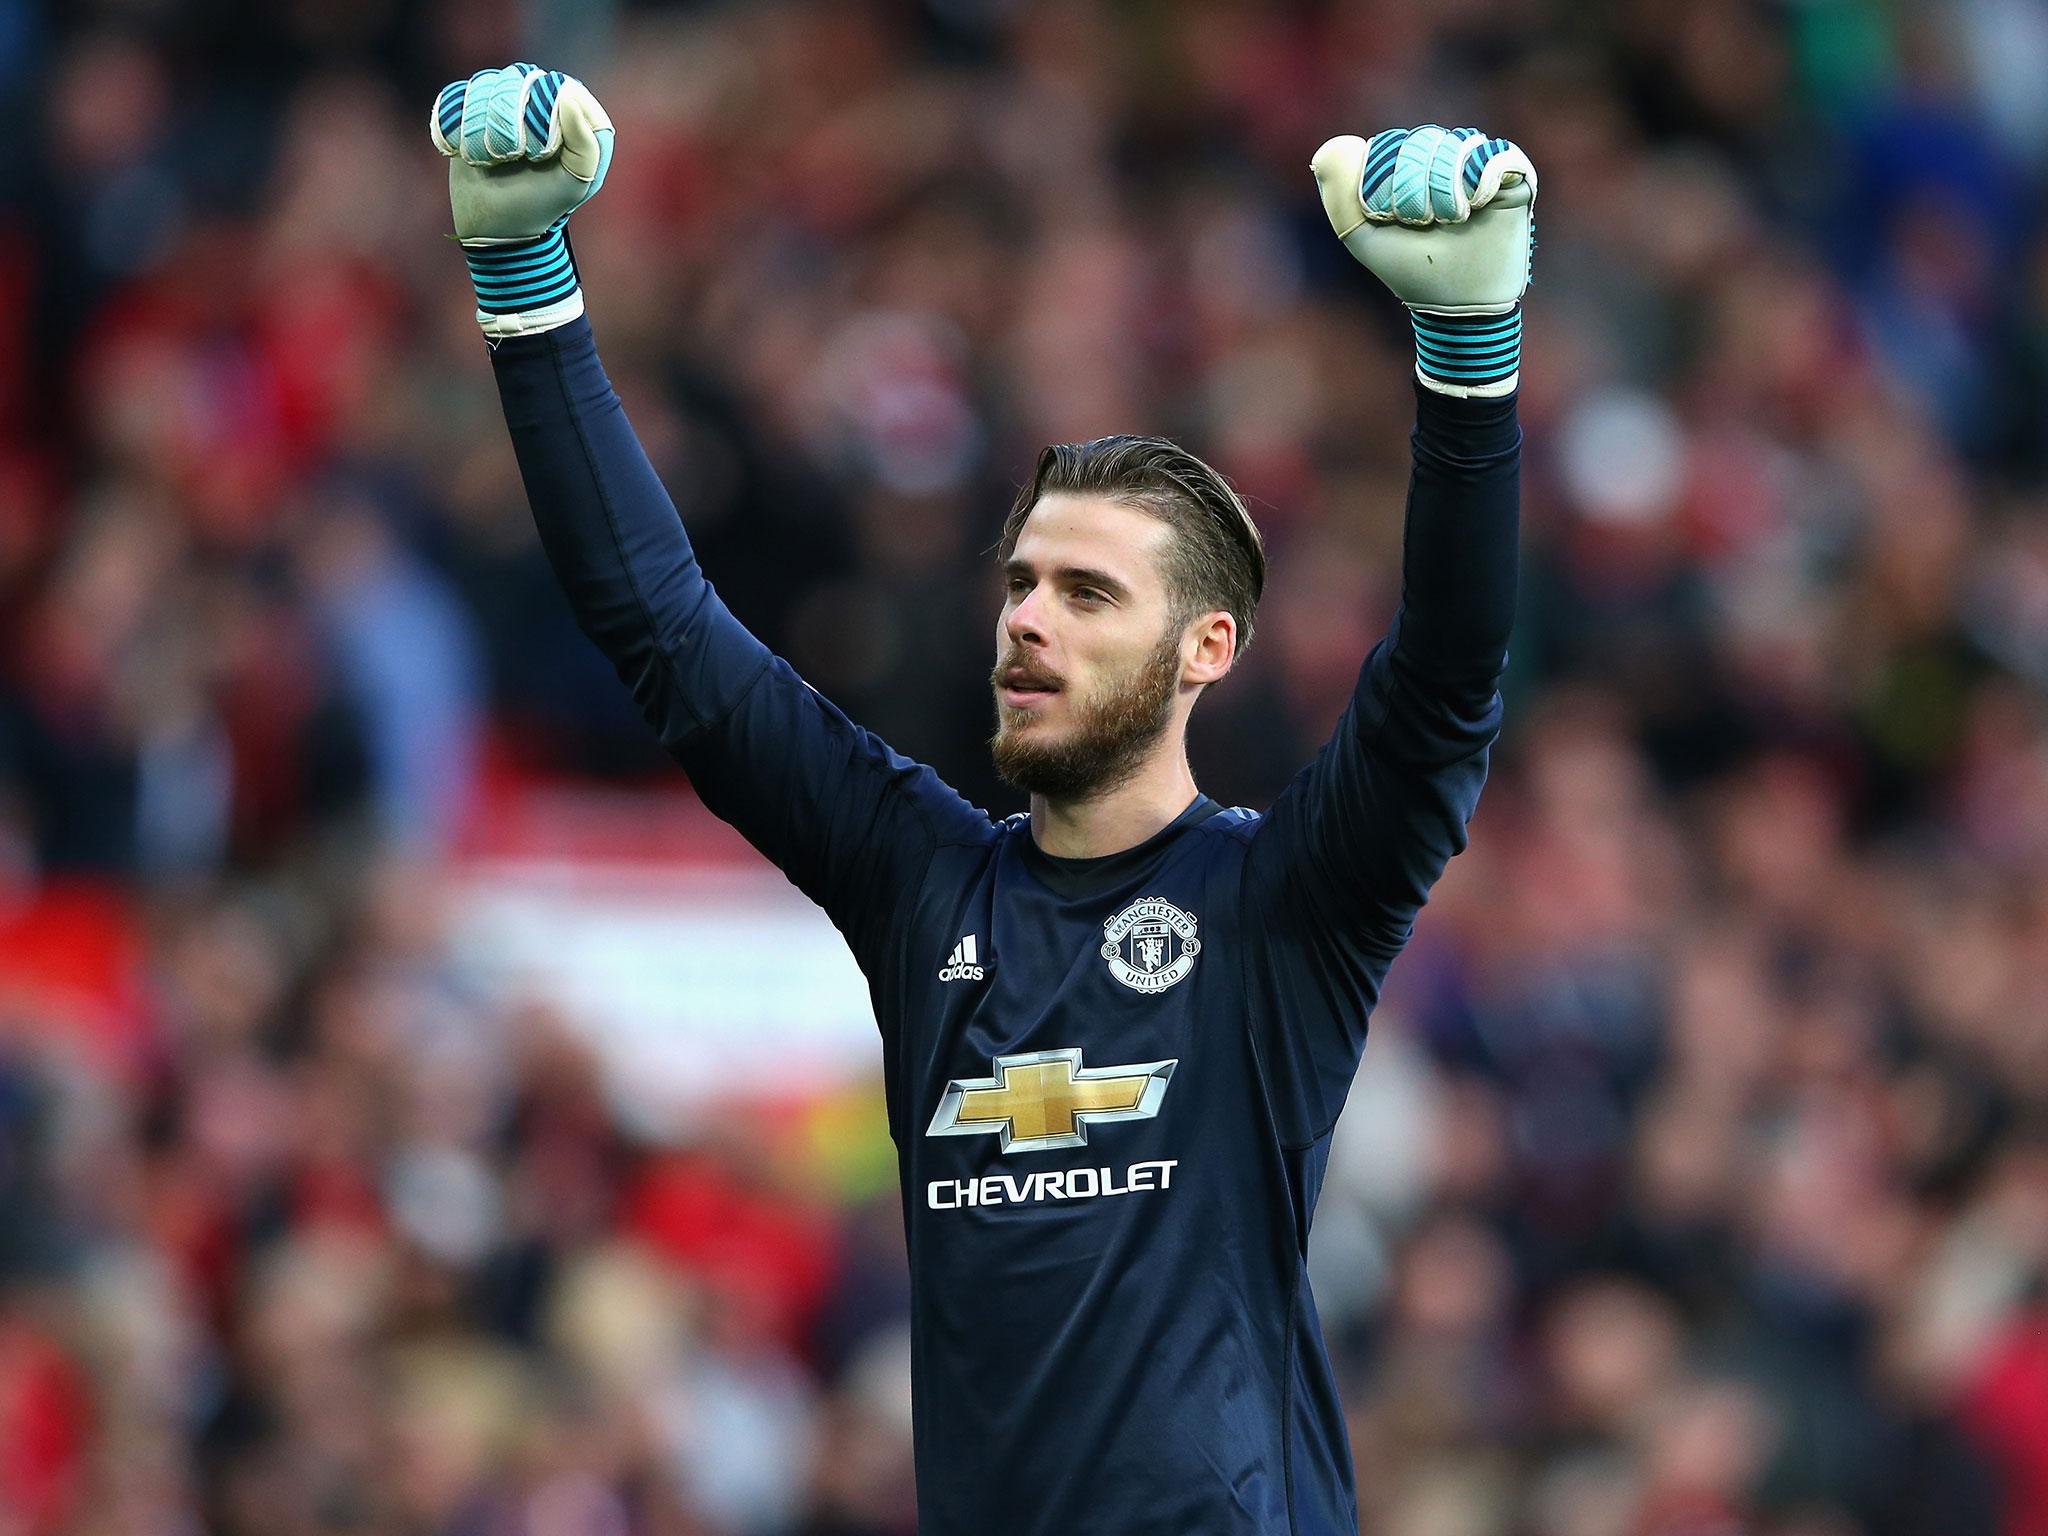 The Spaniard recorded his 100th clean sheet at United over the weekend